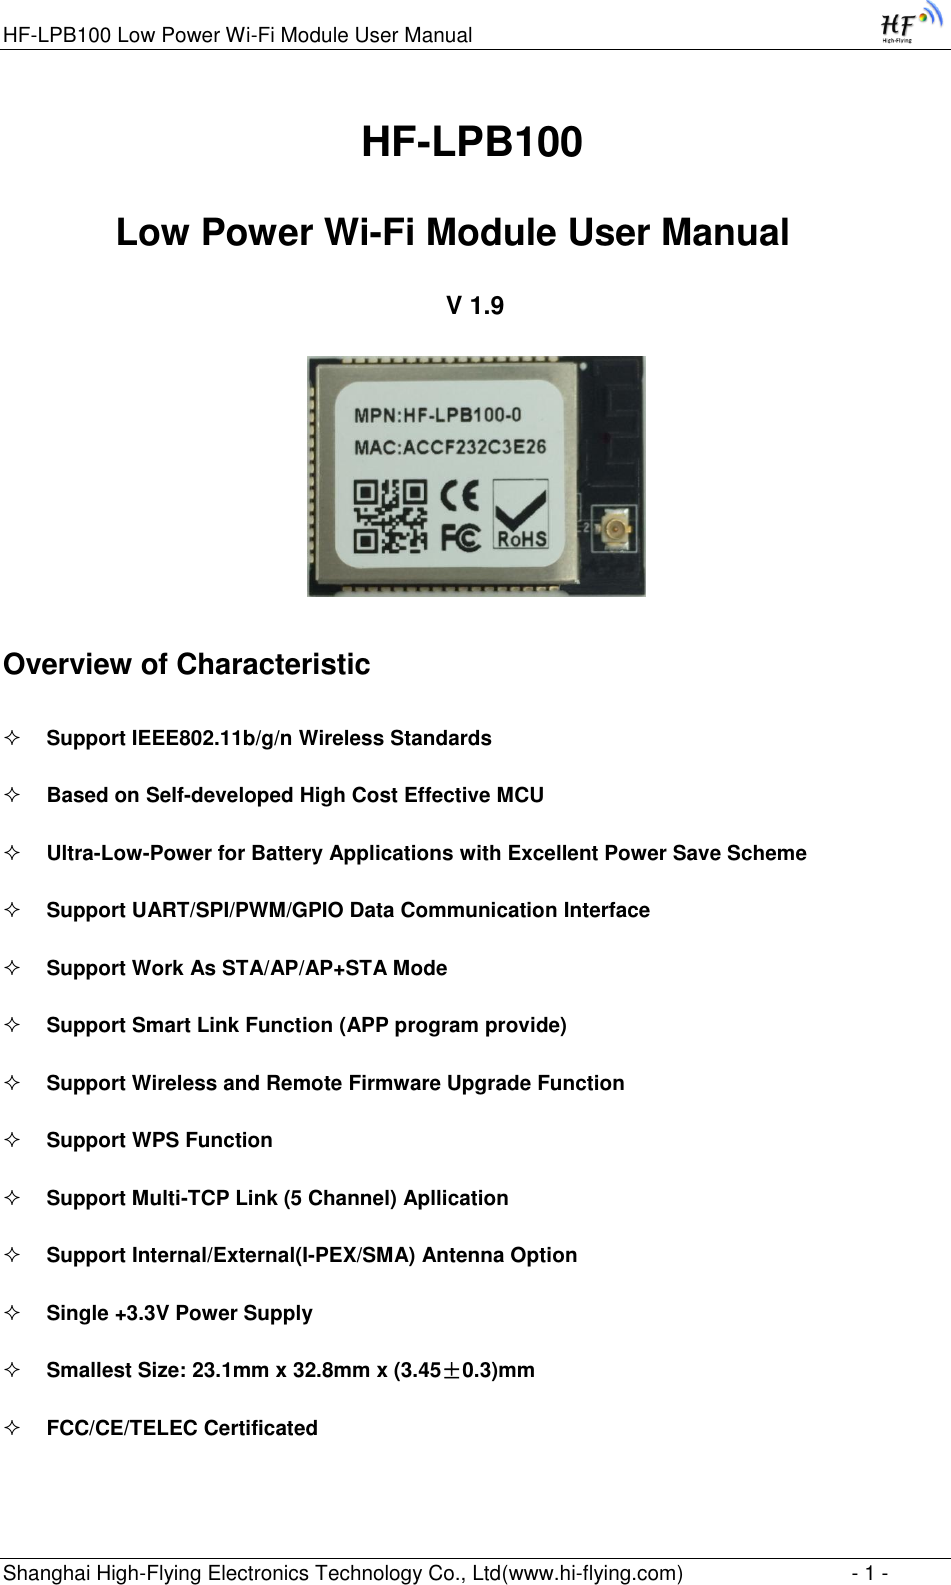 HF-LPB100 Low Power Wi-Fi Module User Manual Shanghai High-Flying Electronics Technology Co., Ltd(www.hi-flying.com)  - 1 -                                HF-LPB100  Low Power Wi-Fi Module User Manual V 1.9  Overview of Characteristic  Support IEEE802.11b/g/n Wireless Standards  Based on Self-developed High Cost Effective MCU  Ultra-Low-Power for Battery Applications with Excellent Power Save Scheme  Support UART/SPI/PWM/GPIO Data Communication Interface  Support Work As STA/AP/AP+STA Mode  Support Smart Link Function (APP program provide)  Support Wireless and Remote Firmware Upgrade Function  Support WPS Function  Support Multi-TCP Link (5 Channel) Apllication  Support Internal/External(I-PEX/SMA) Antenna Option  Single +3.3V Power Supply  Smallest Size: 23.1mm x 32.8mm x (3.45±0.3)mm   FCC/CE/TELEC Certificated 